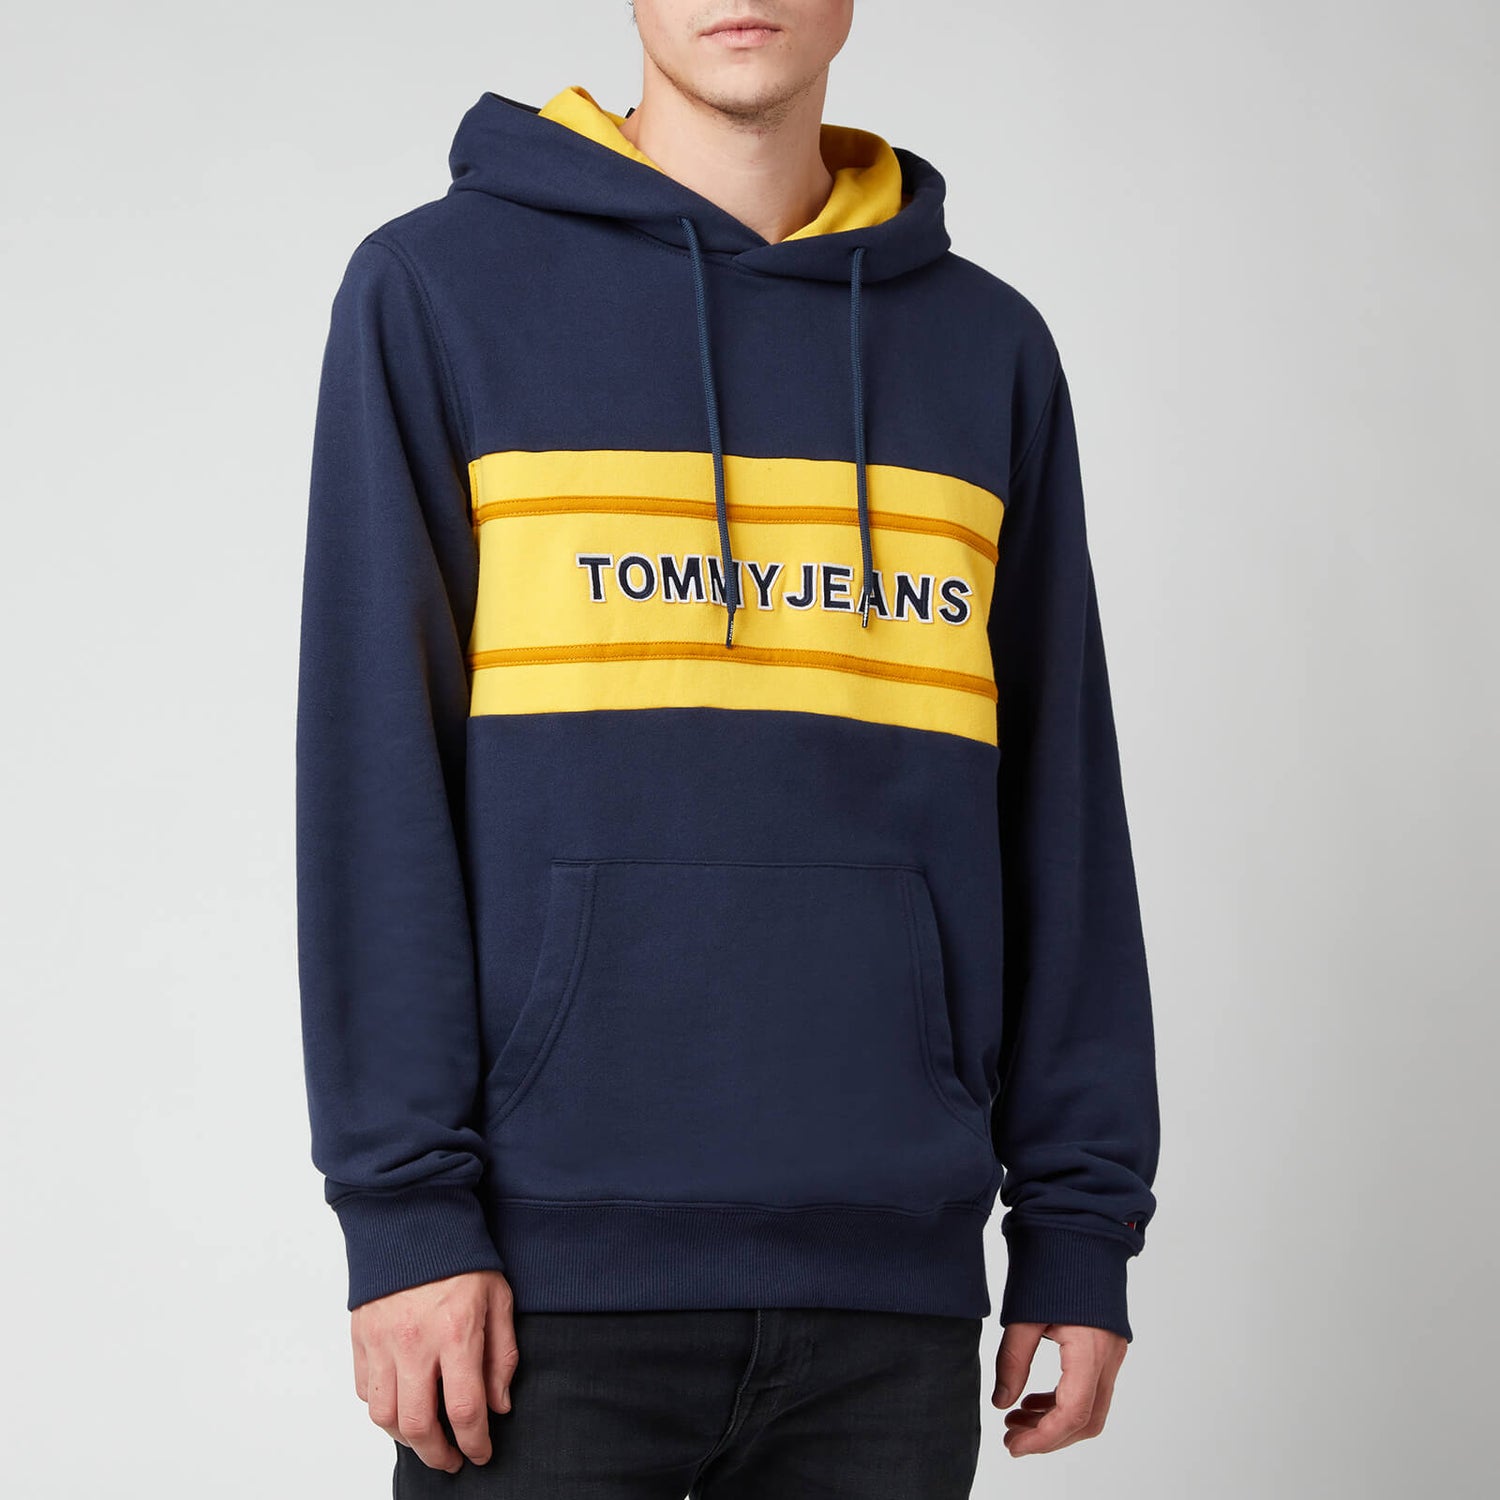 Tommy Jeans Men's Pieced Band Hoodie - Twilight Navy/Multi